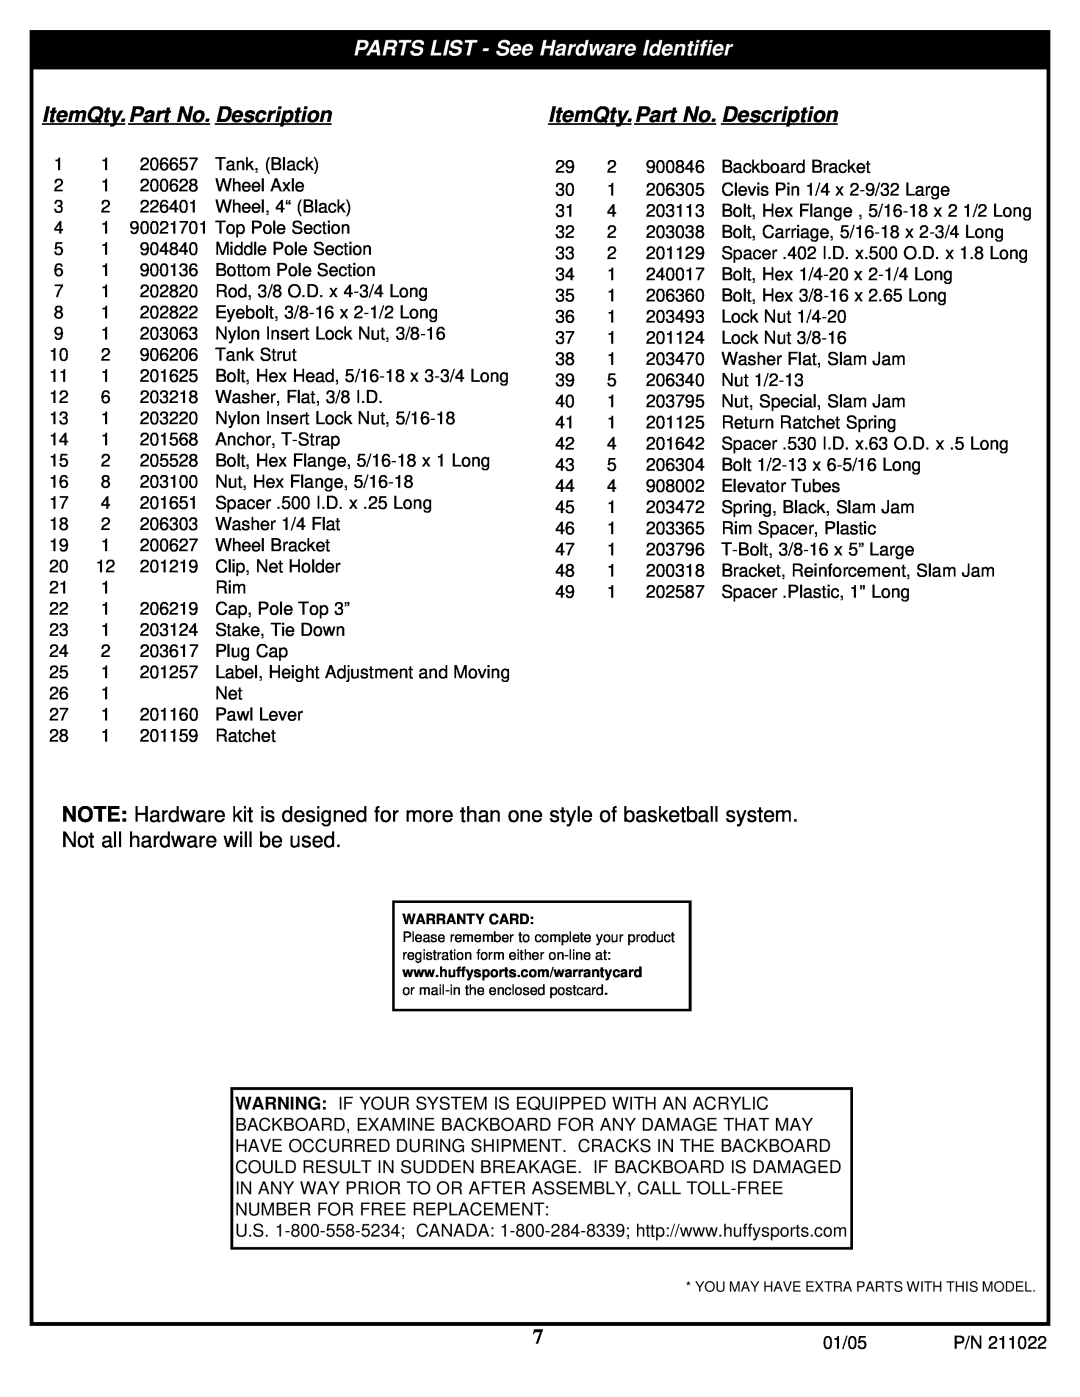 Huffy Portable System PARTS LIST - See Hardware Identifier, ItemQty.Part No. Description, Not all hardware will be used 